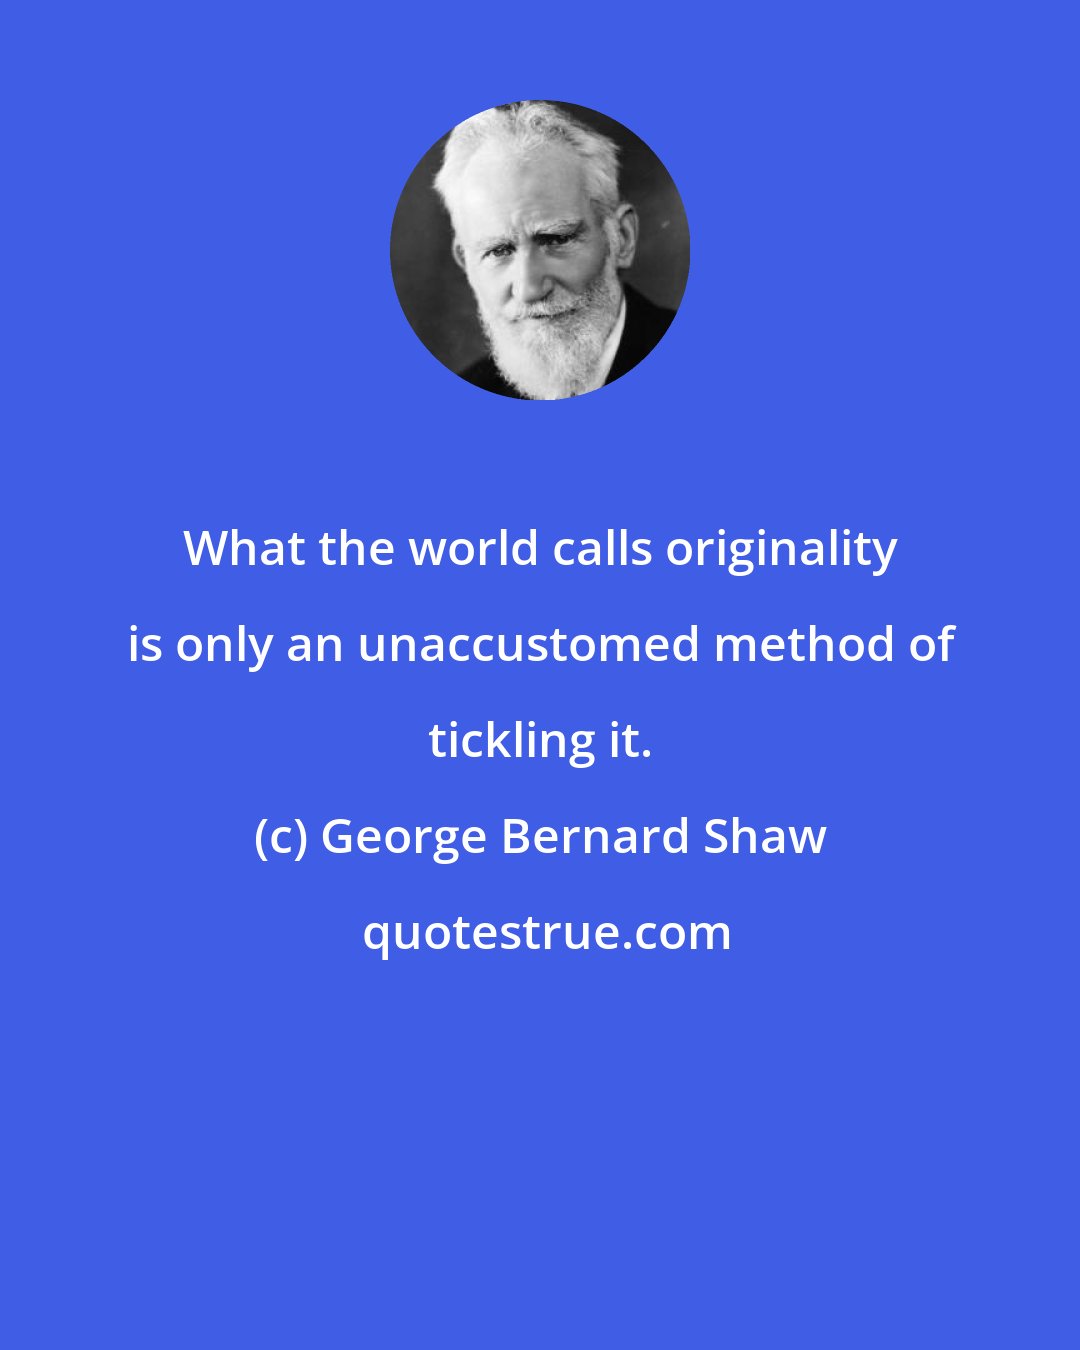 George Bernard Shaw: What the world calls originality is only an unaccustomed method of tickling it.